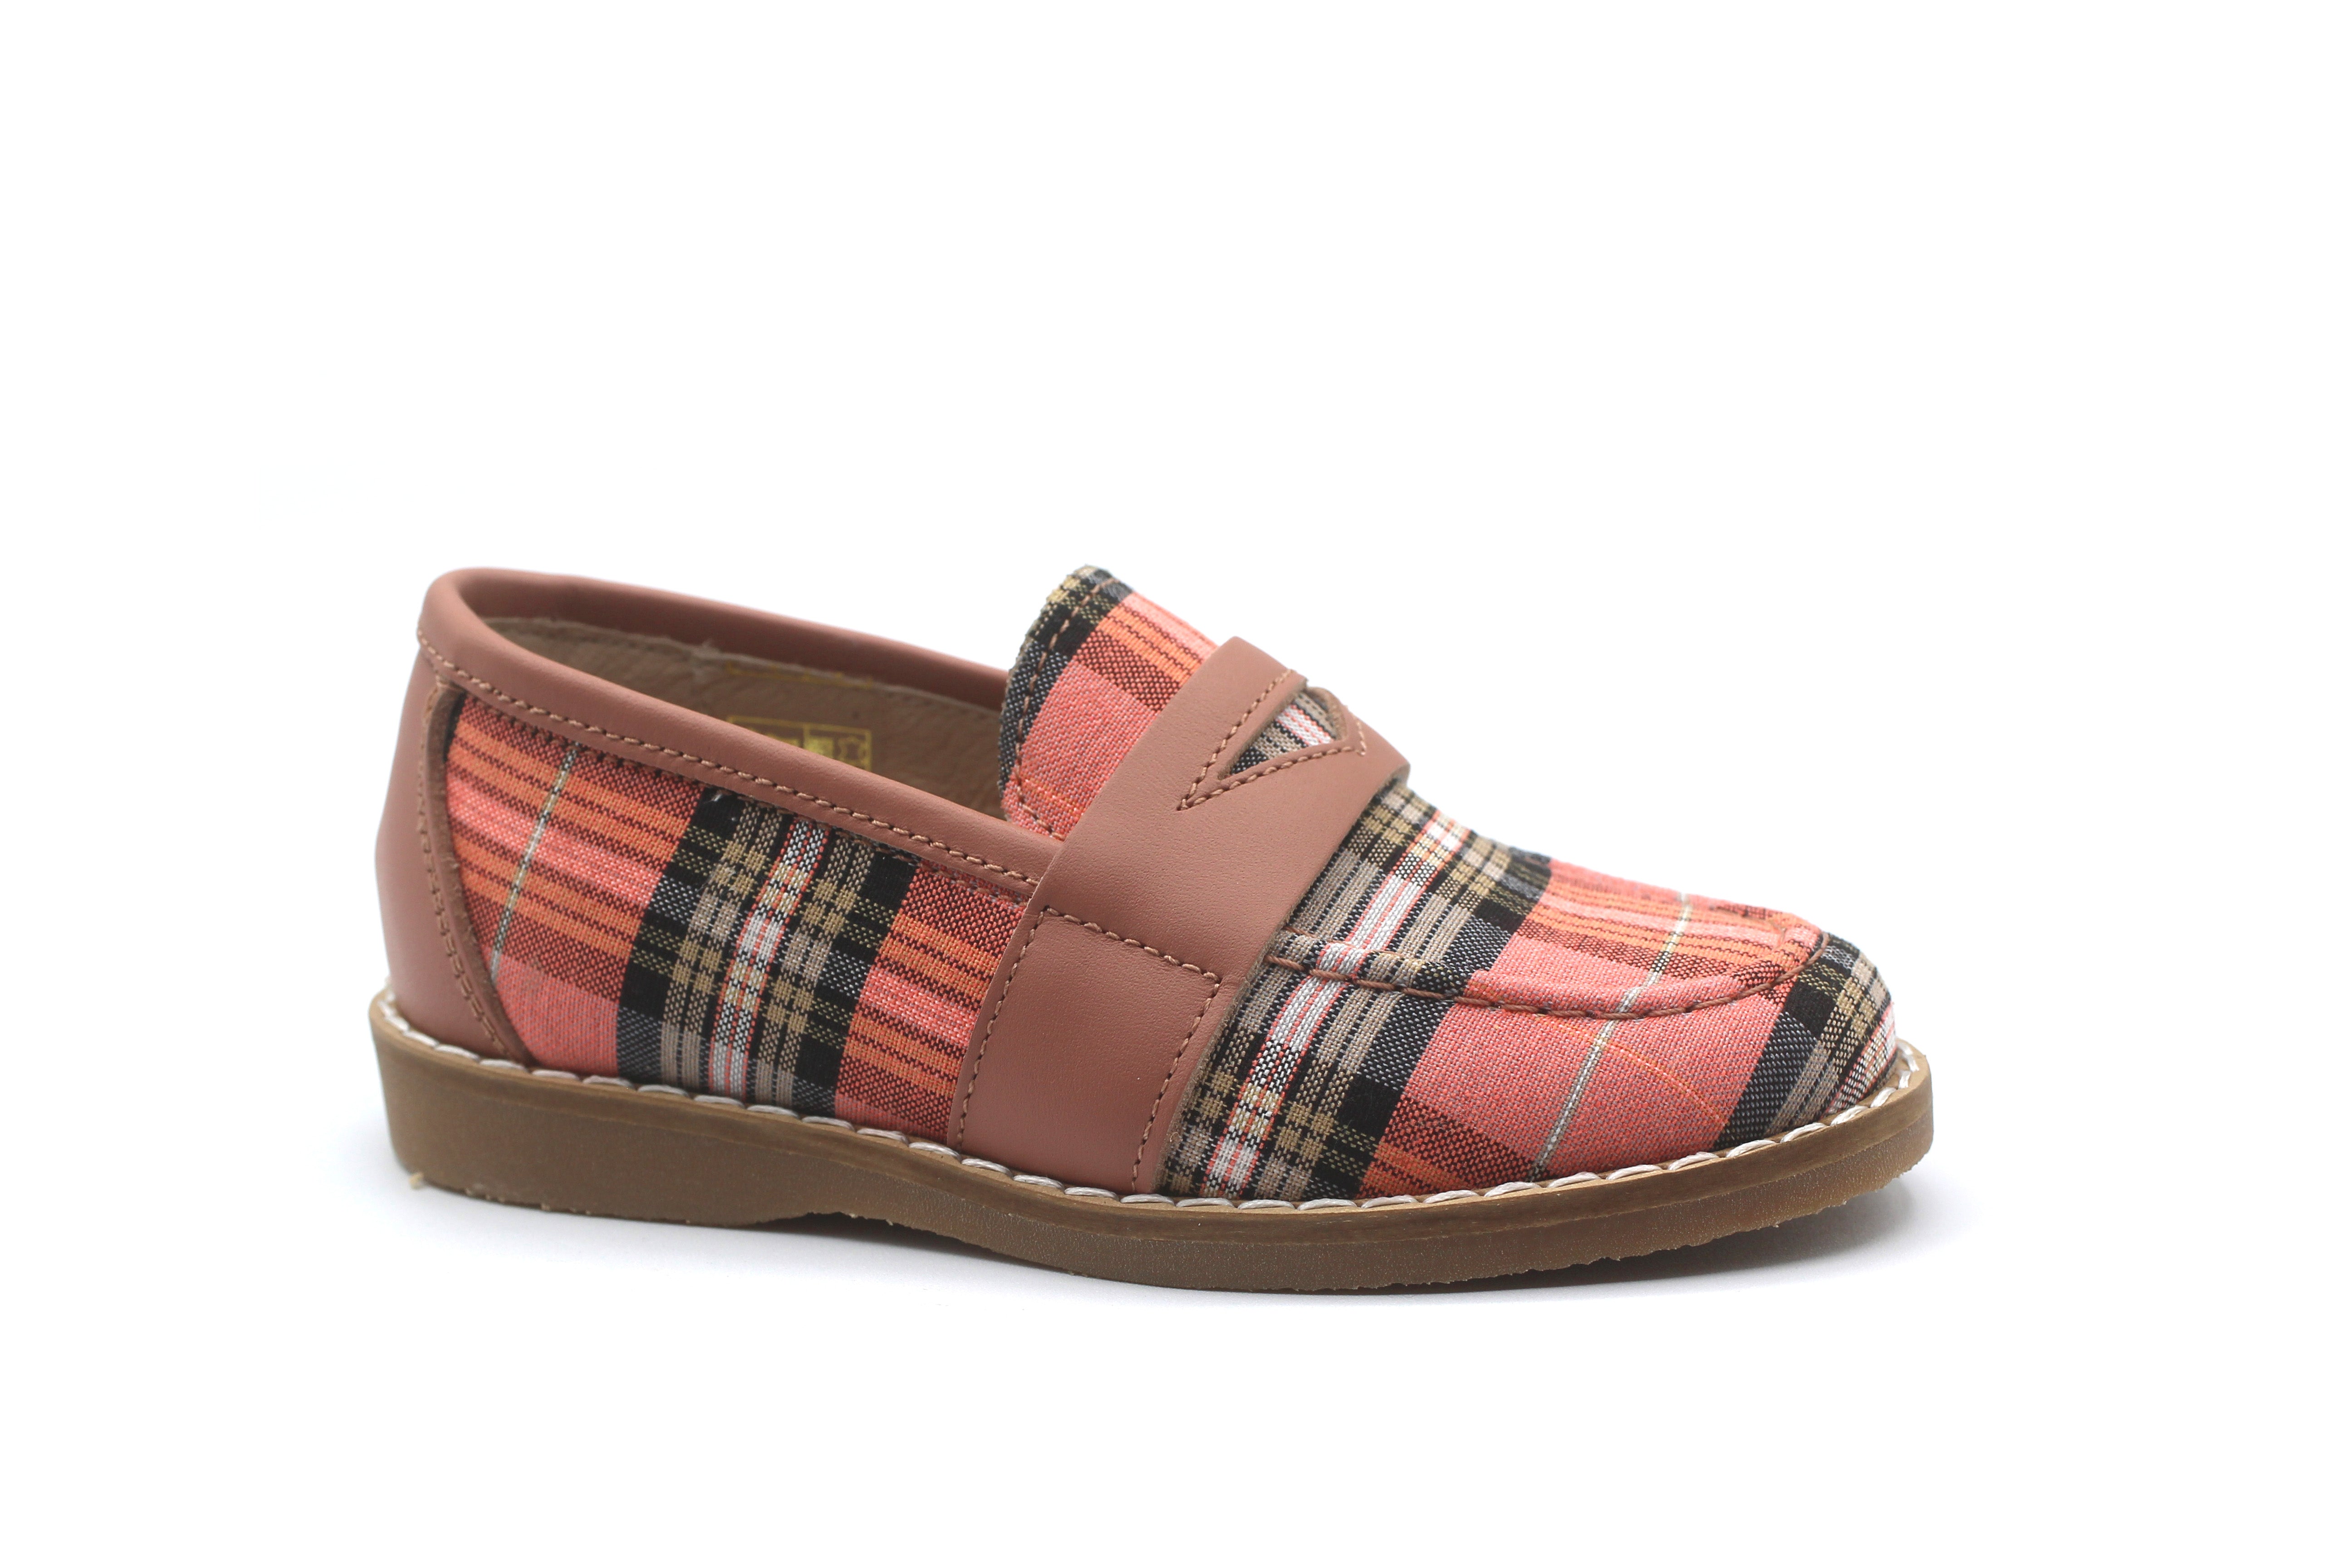 Don Louis Pink Plaid Loafer